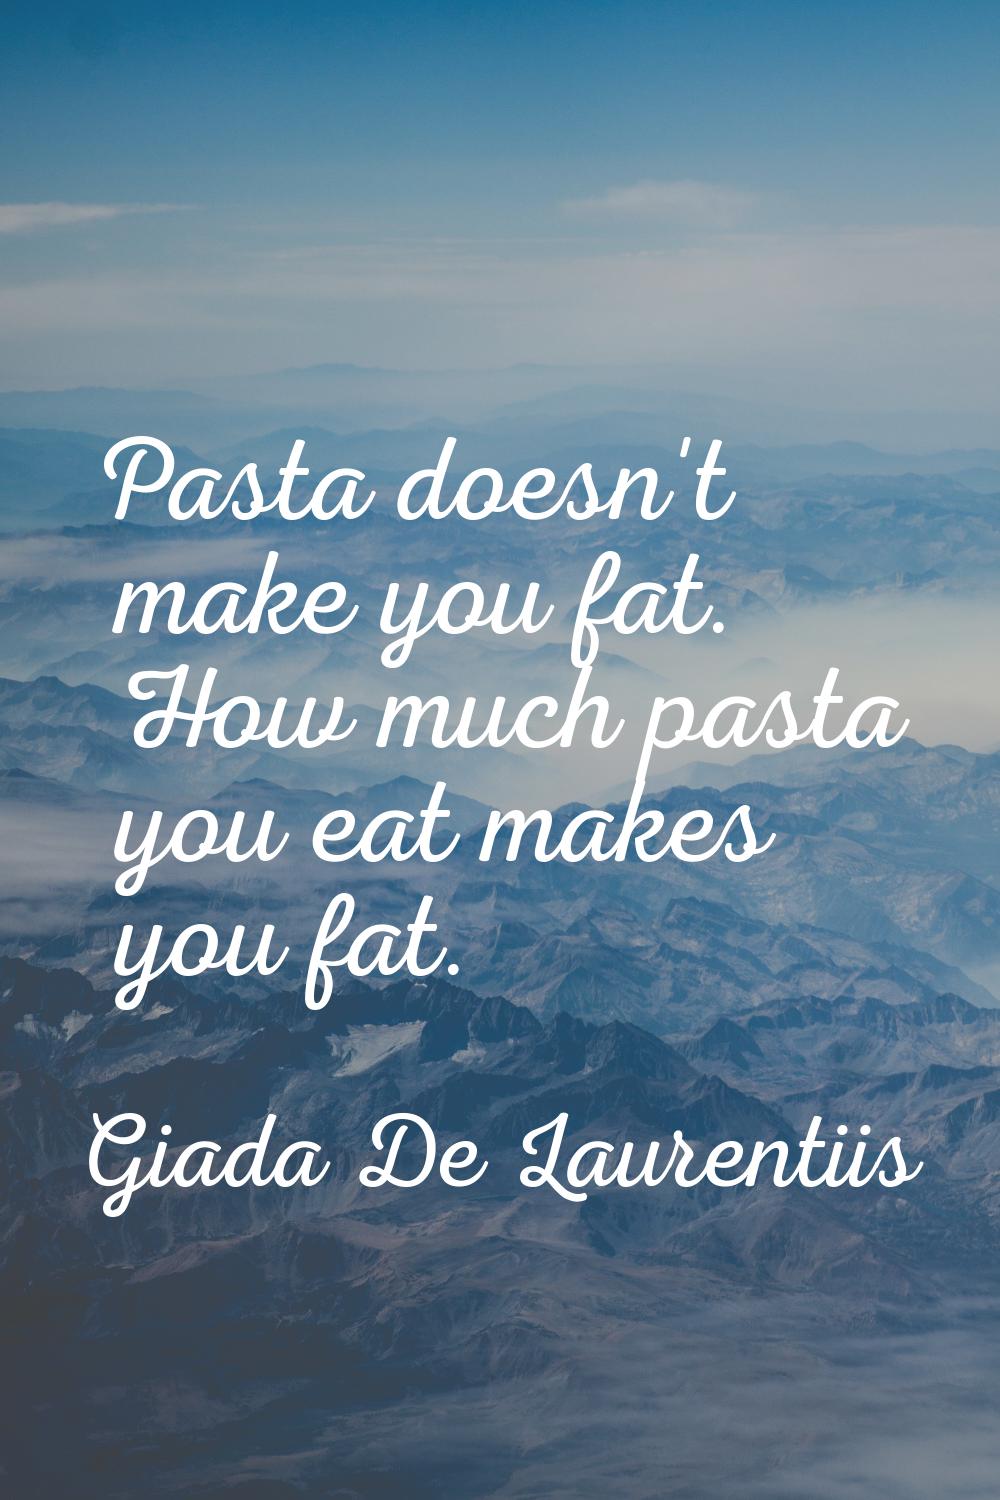 Pasta doesn't make you fat. How much pasta you eat makes you fat.